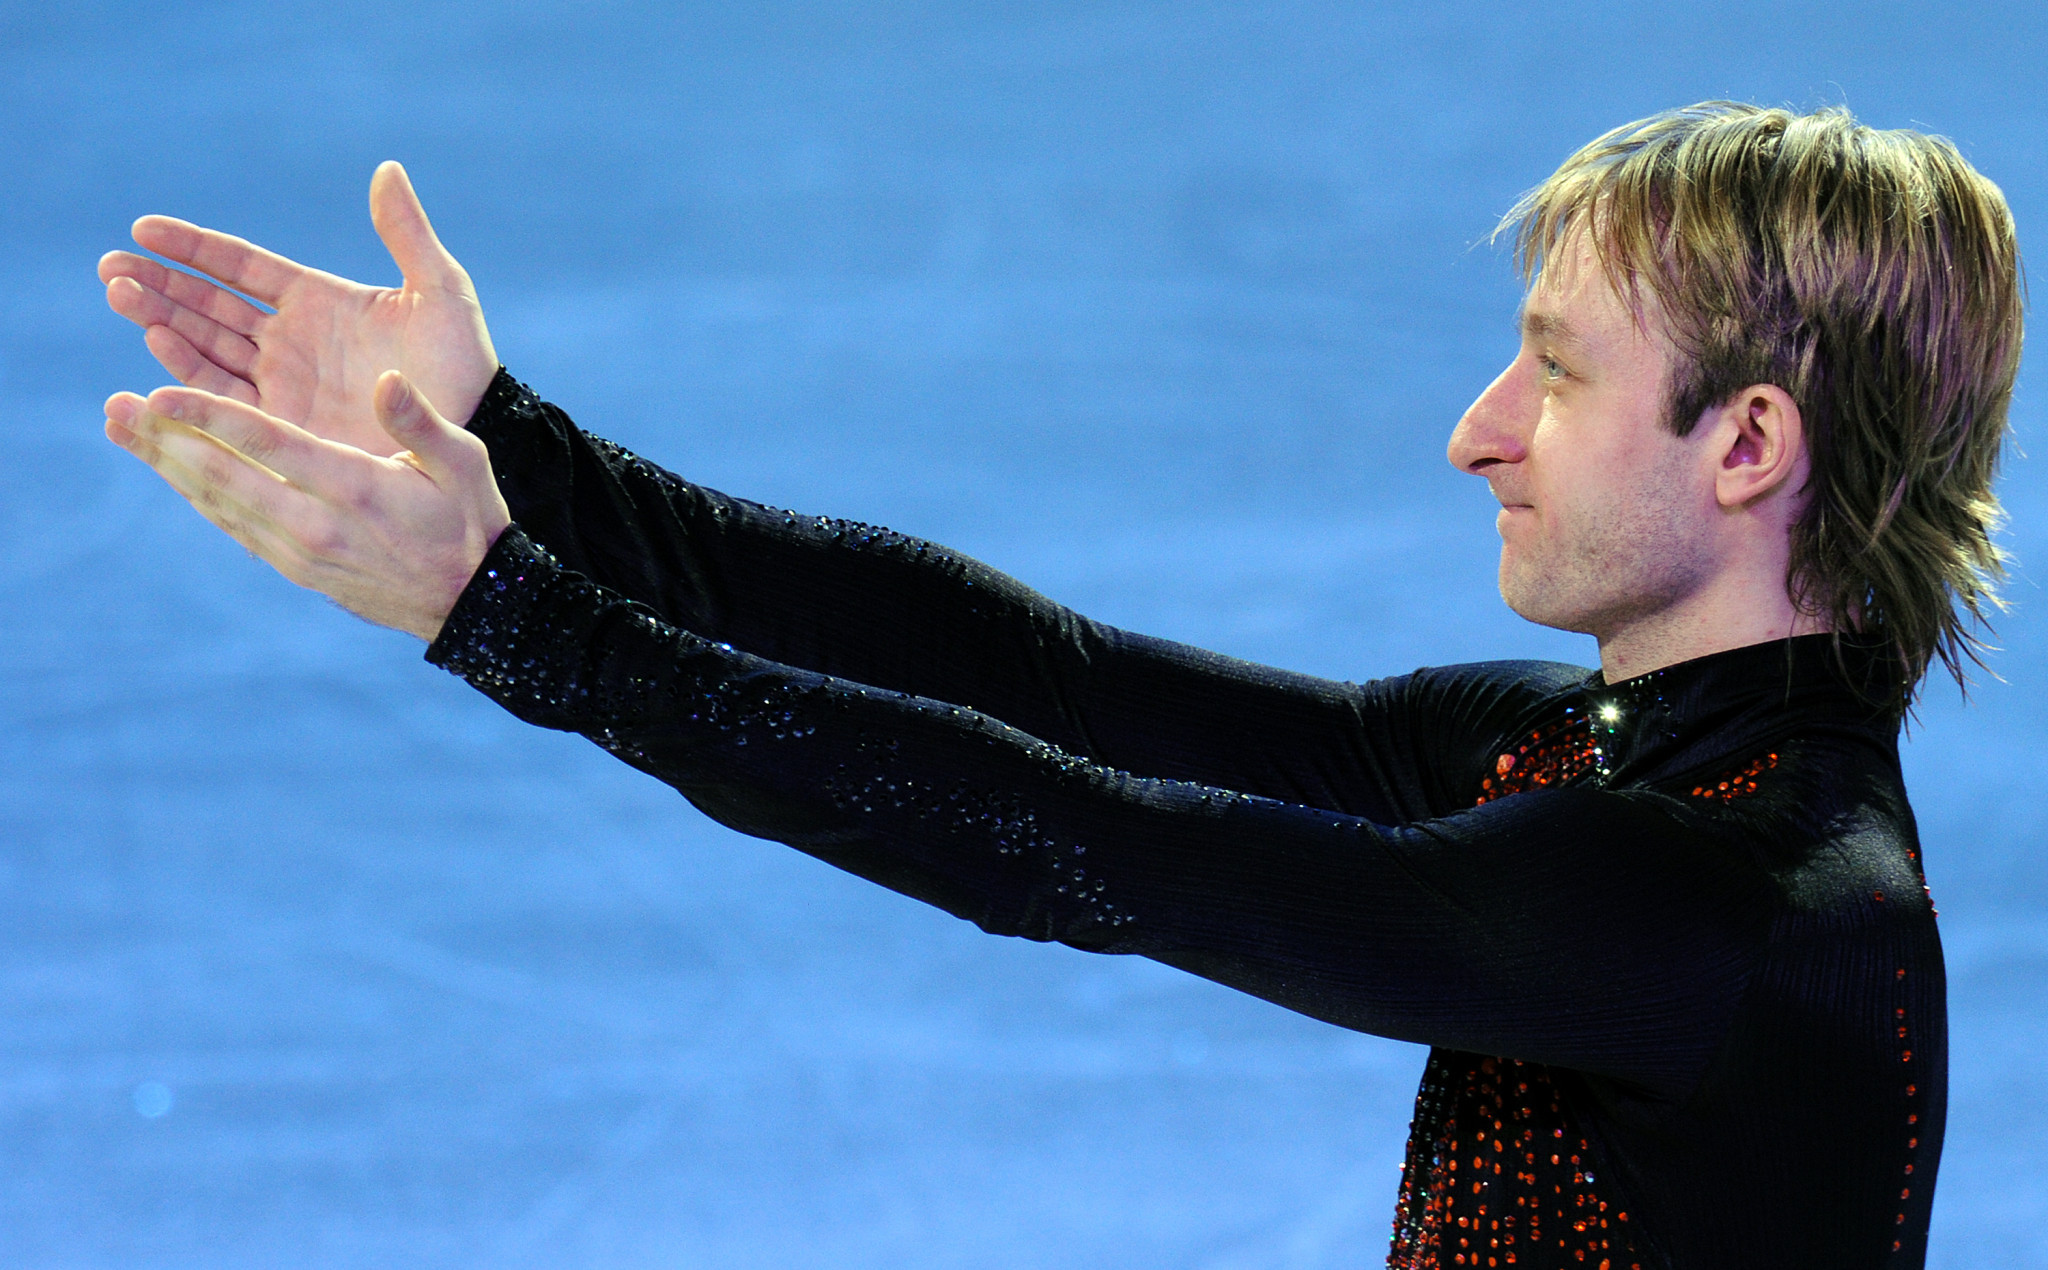 Russian figure skating star Evgeni Plushenko was among those to pay tribute to Igor Borisovich Moskvin following his death ©Getty Images